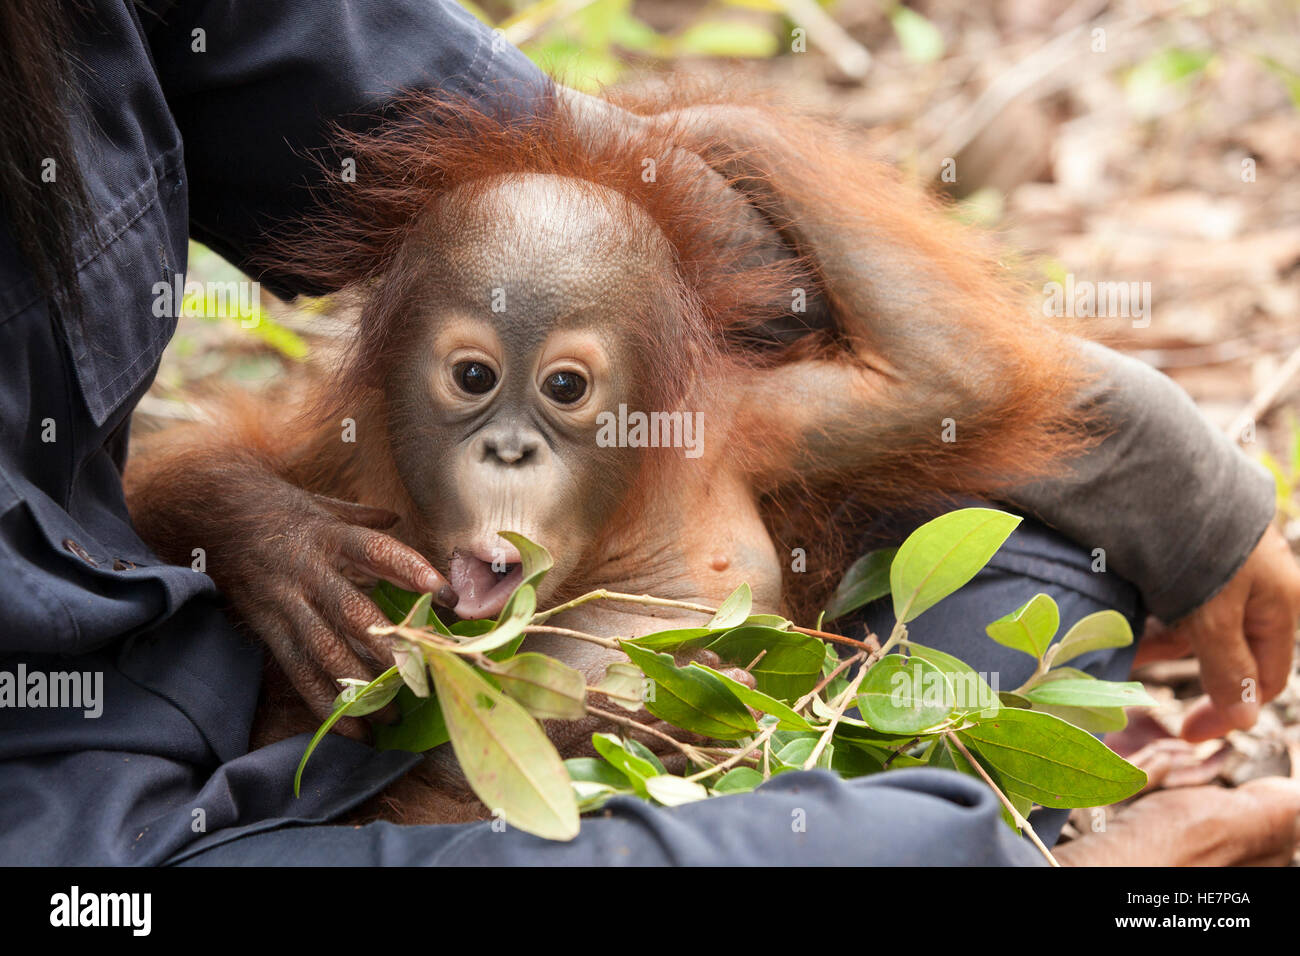 Curious baby orphan orangutan (Pongo pygmaeus) in caretaker's lap playing with leaves during forest training session to prepare for eventual release Stock Photo